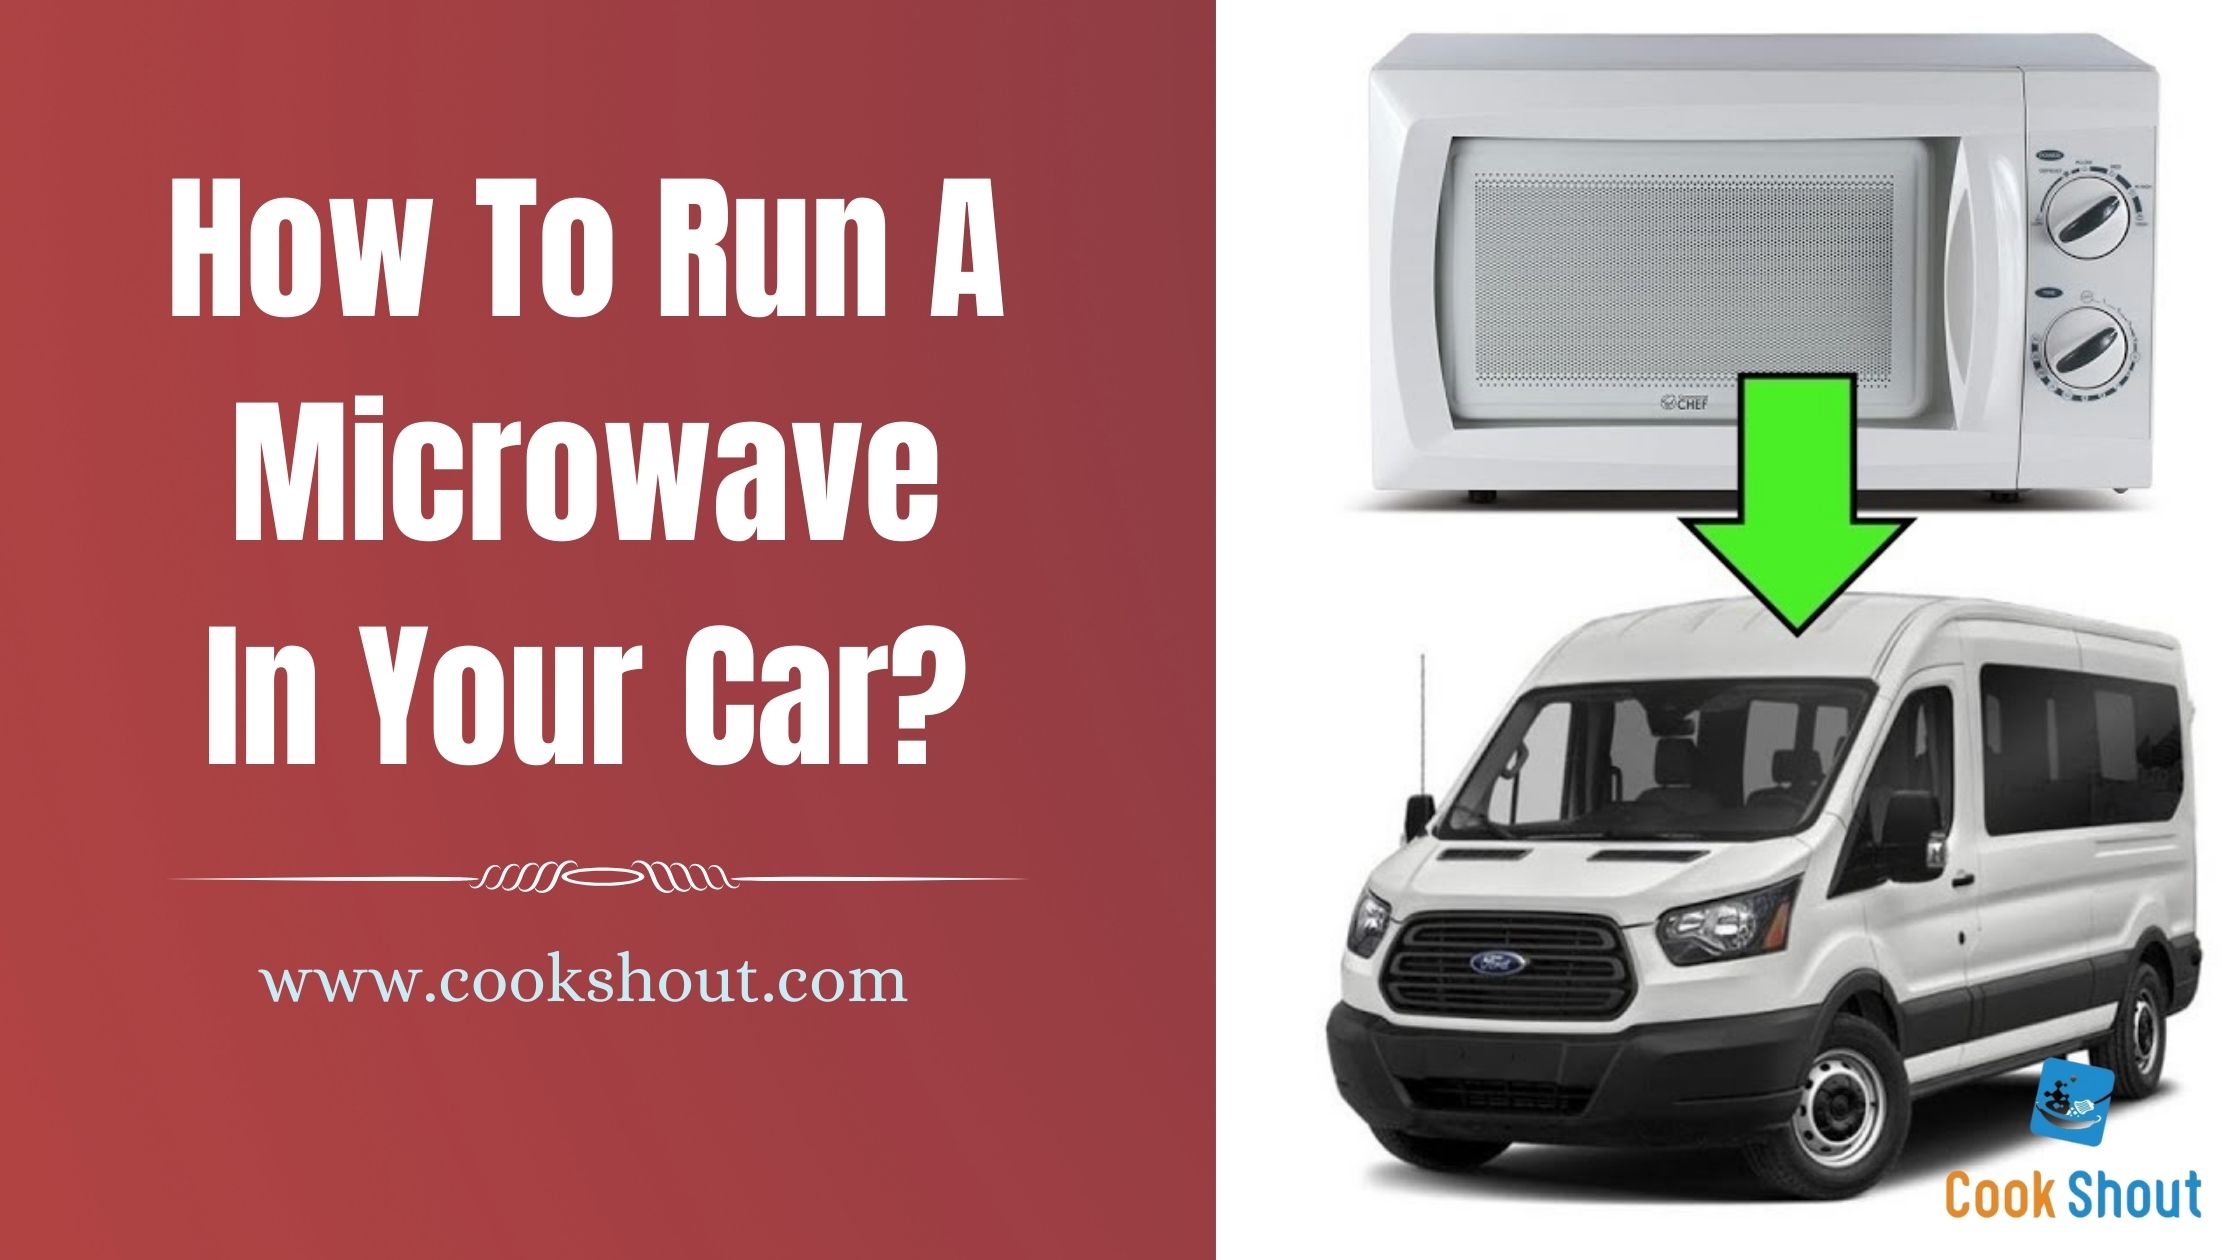 How To Run A Microwave In Your Car